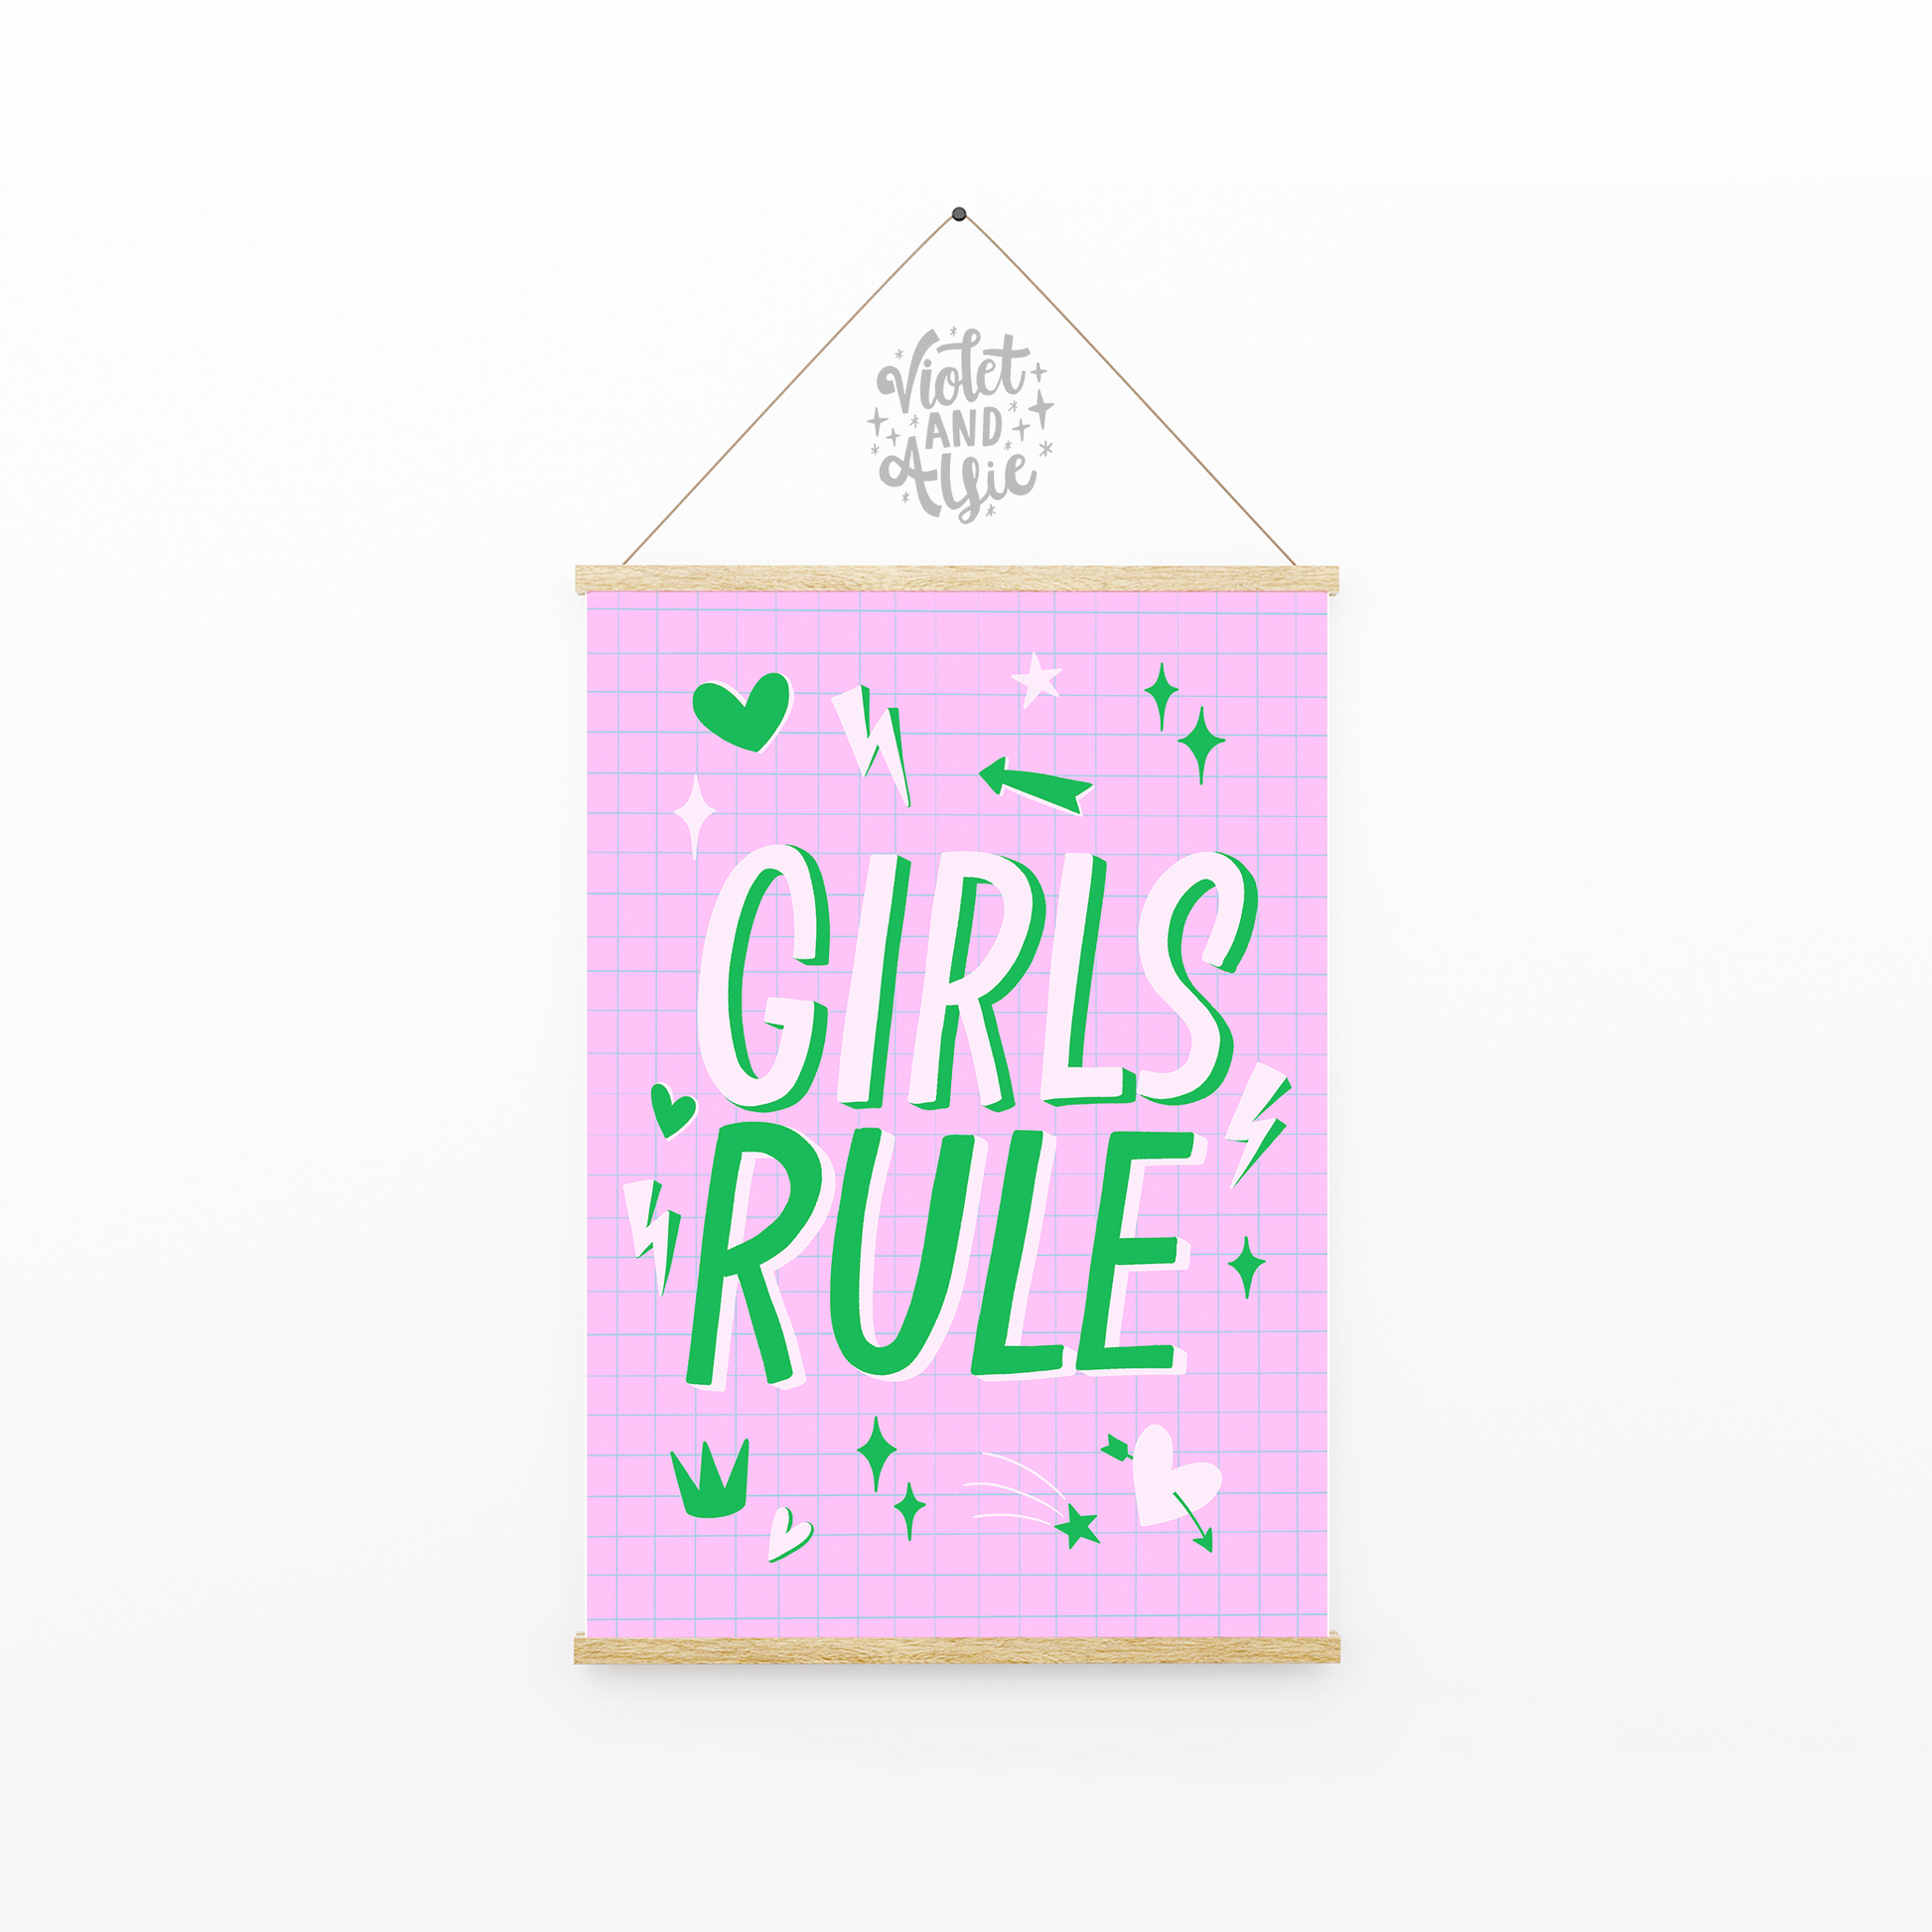 Girls Rule Print | Pre-teen Girl's Room Wall Art | Girl's Room Decor | Pink and Green Typographic Print | Inspirational Posters For Girls | Young Girl Bedroom Decor | Wall Prints For Girls Room 